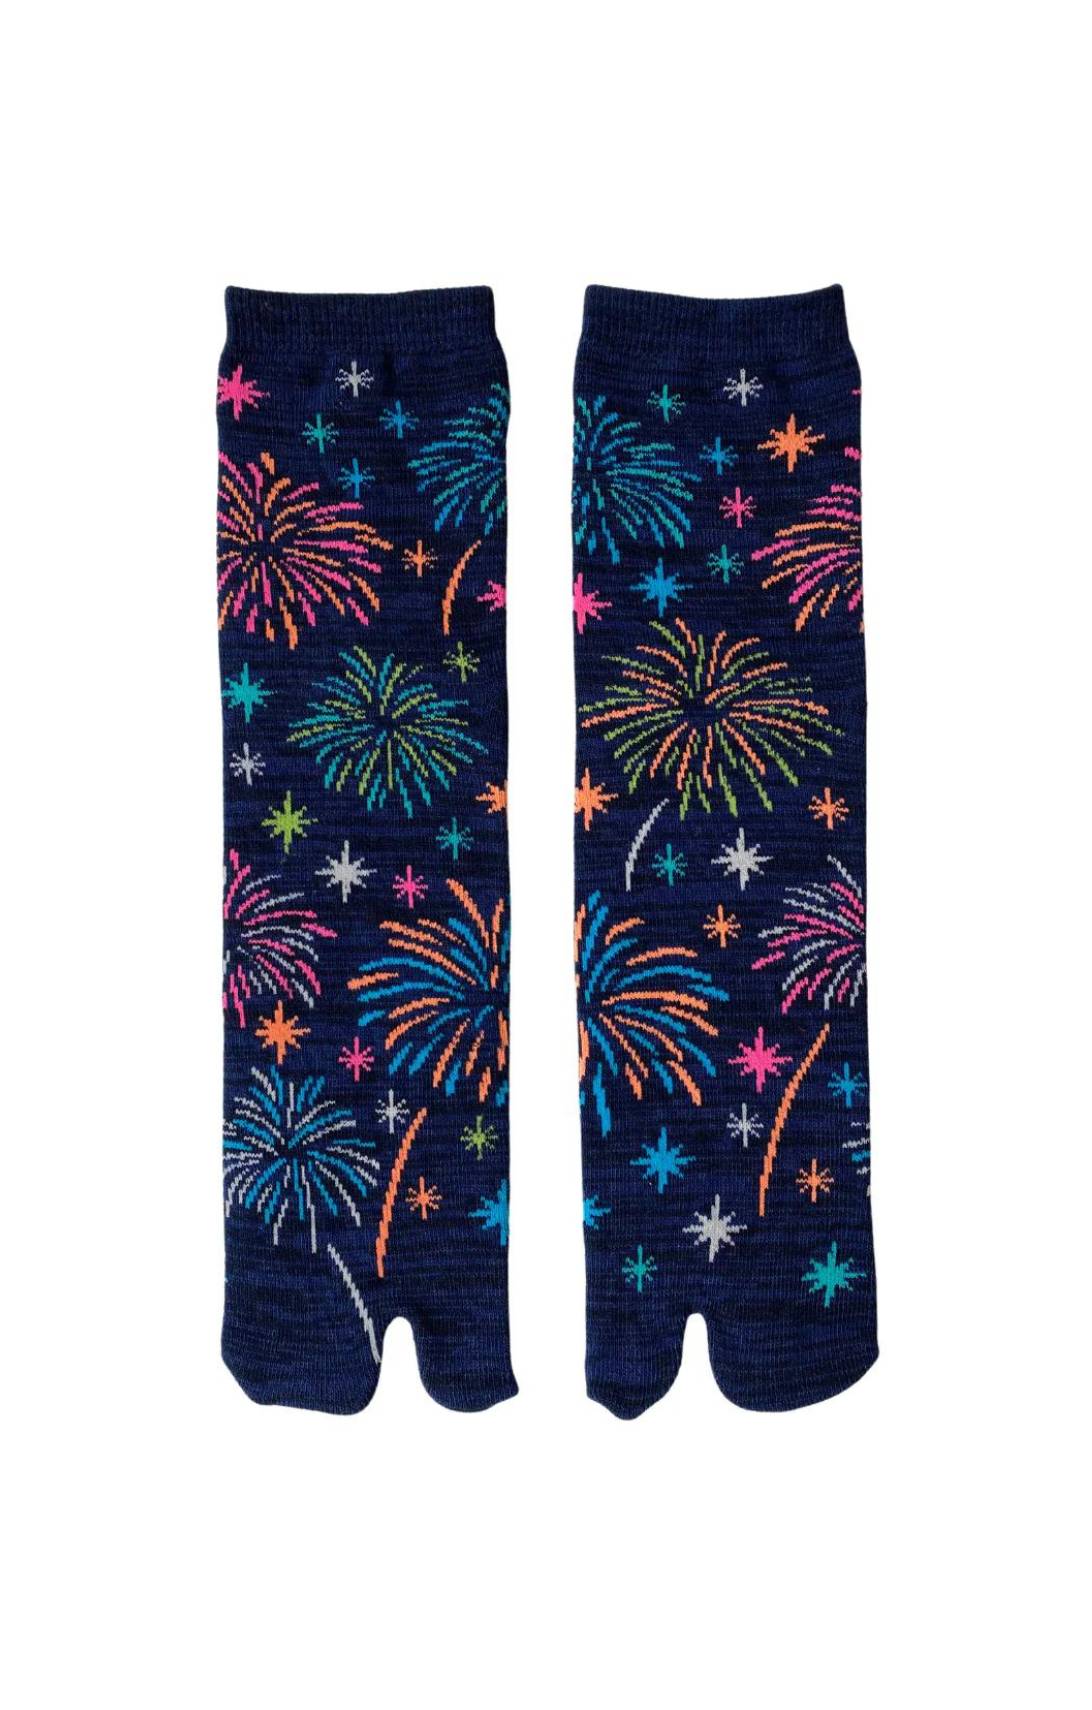 Socks by NINJA SOCKS under the trade name Hanabi Fire Works Tabi Toe Socks, front view in Navy color with colorful fireworks design